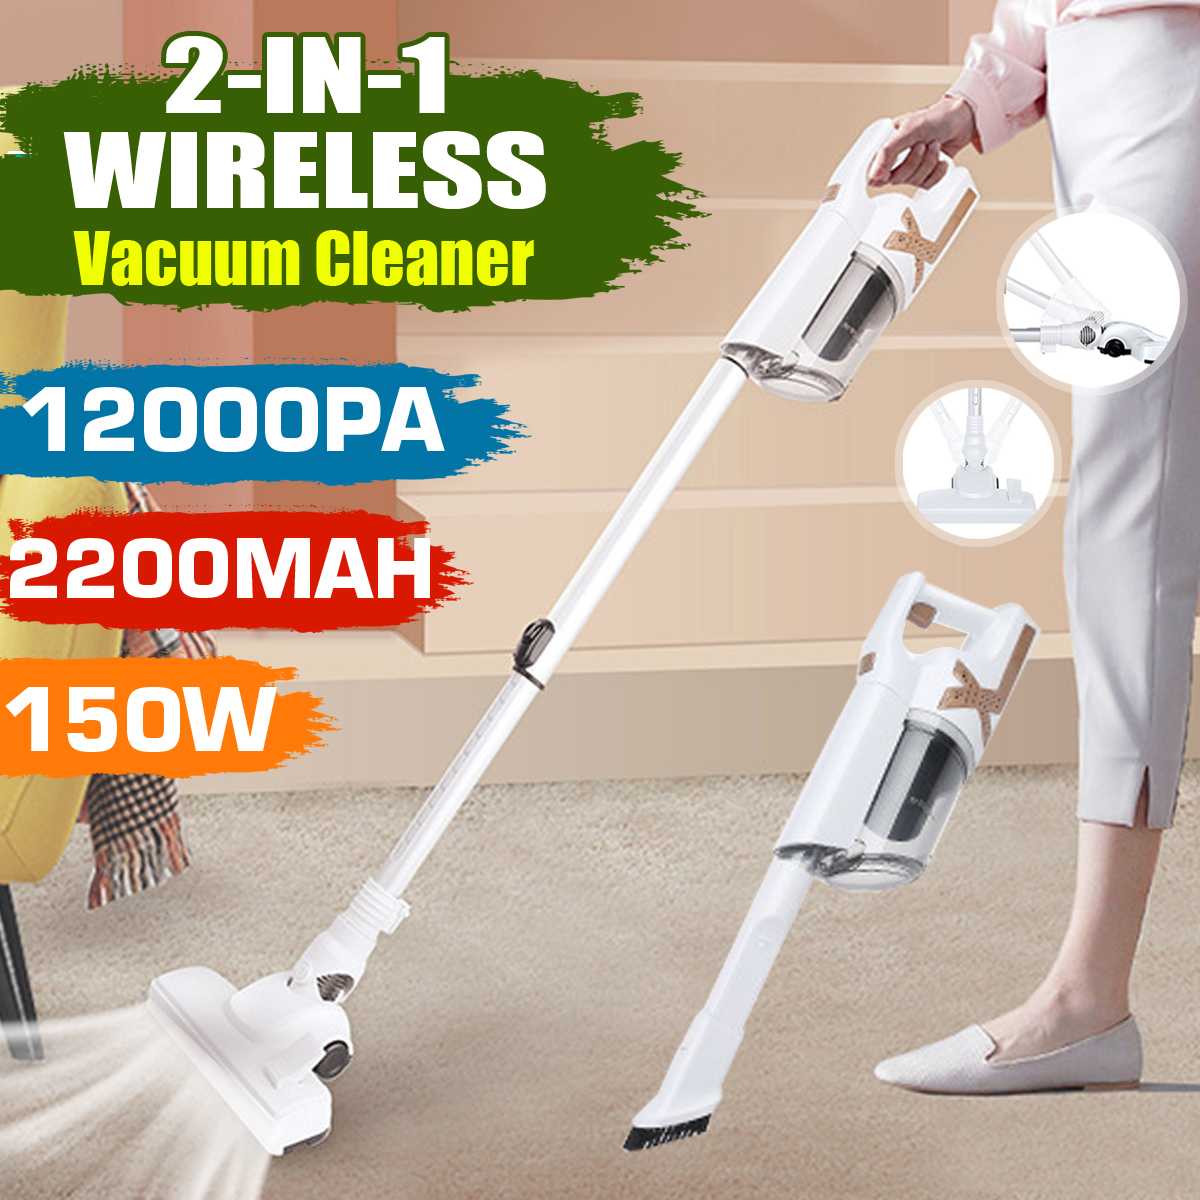 NEW 12000PA Strong Suction Vacuum Cleaner 150W Cordless Handhold Vacuum Cleaner Set Household Mite Remover with LED Lighting